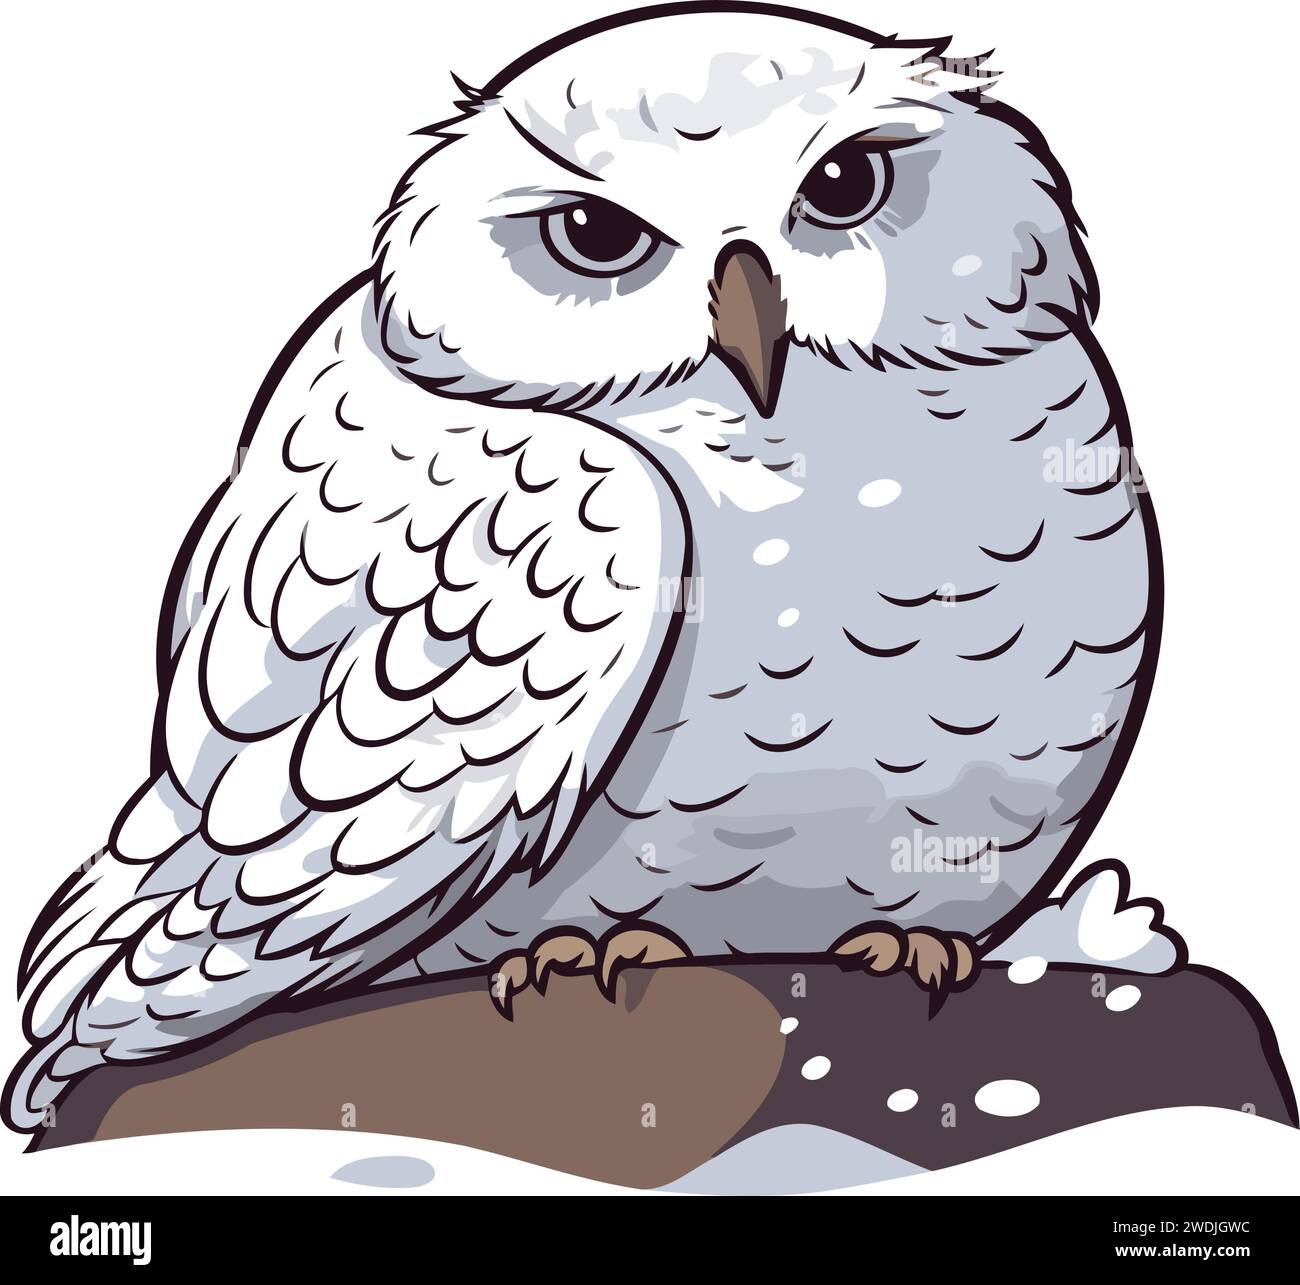 Illustration of a cute owl sitting on a snow covered ground. Stock Vector